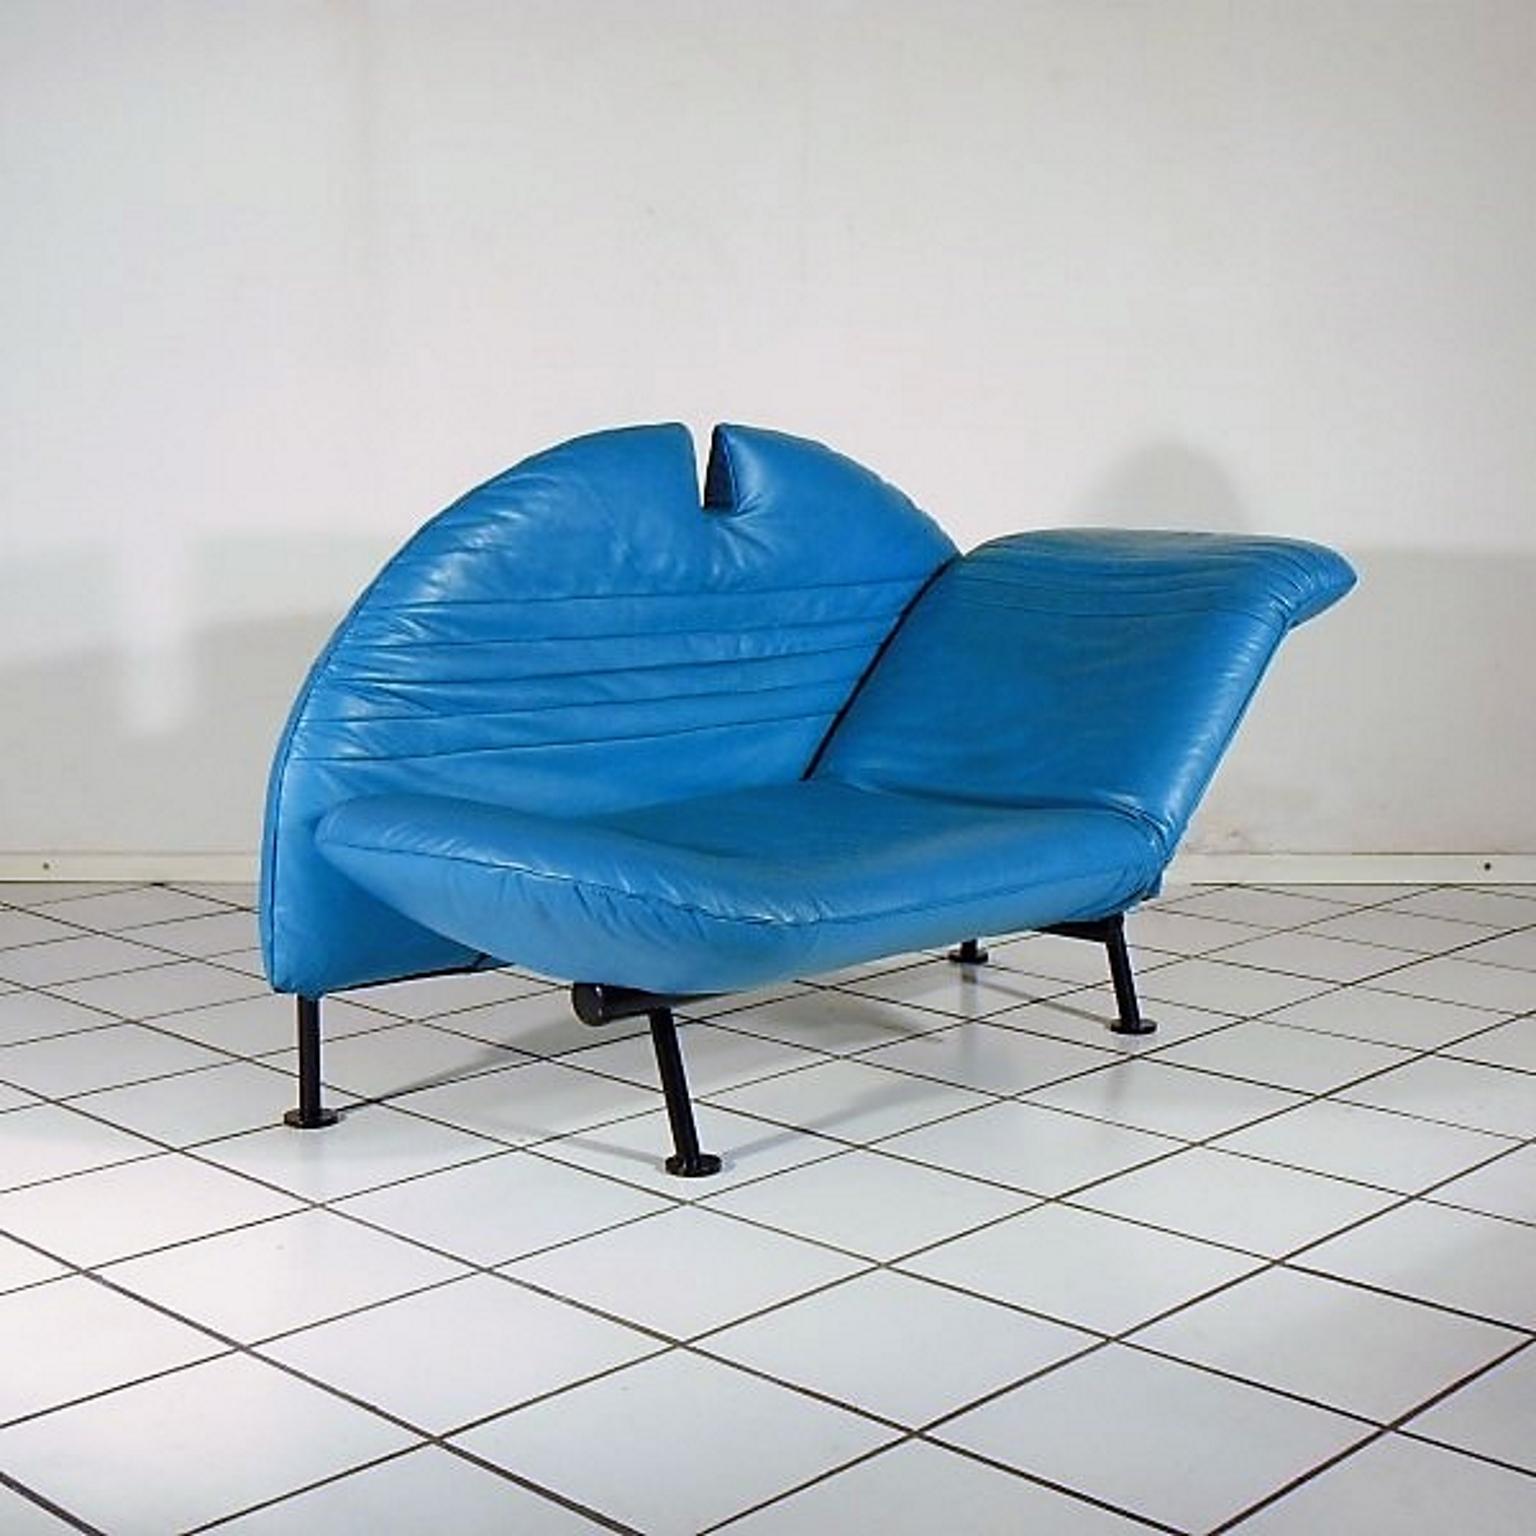 1980s Adjustable Loveseat Turquoise Leather by Walter Leeman for Sormani, Italy For Sale 1